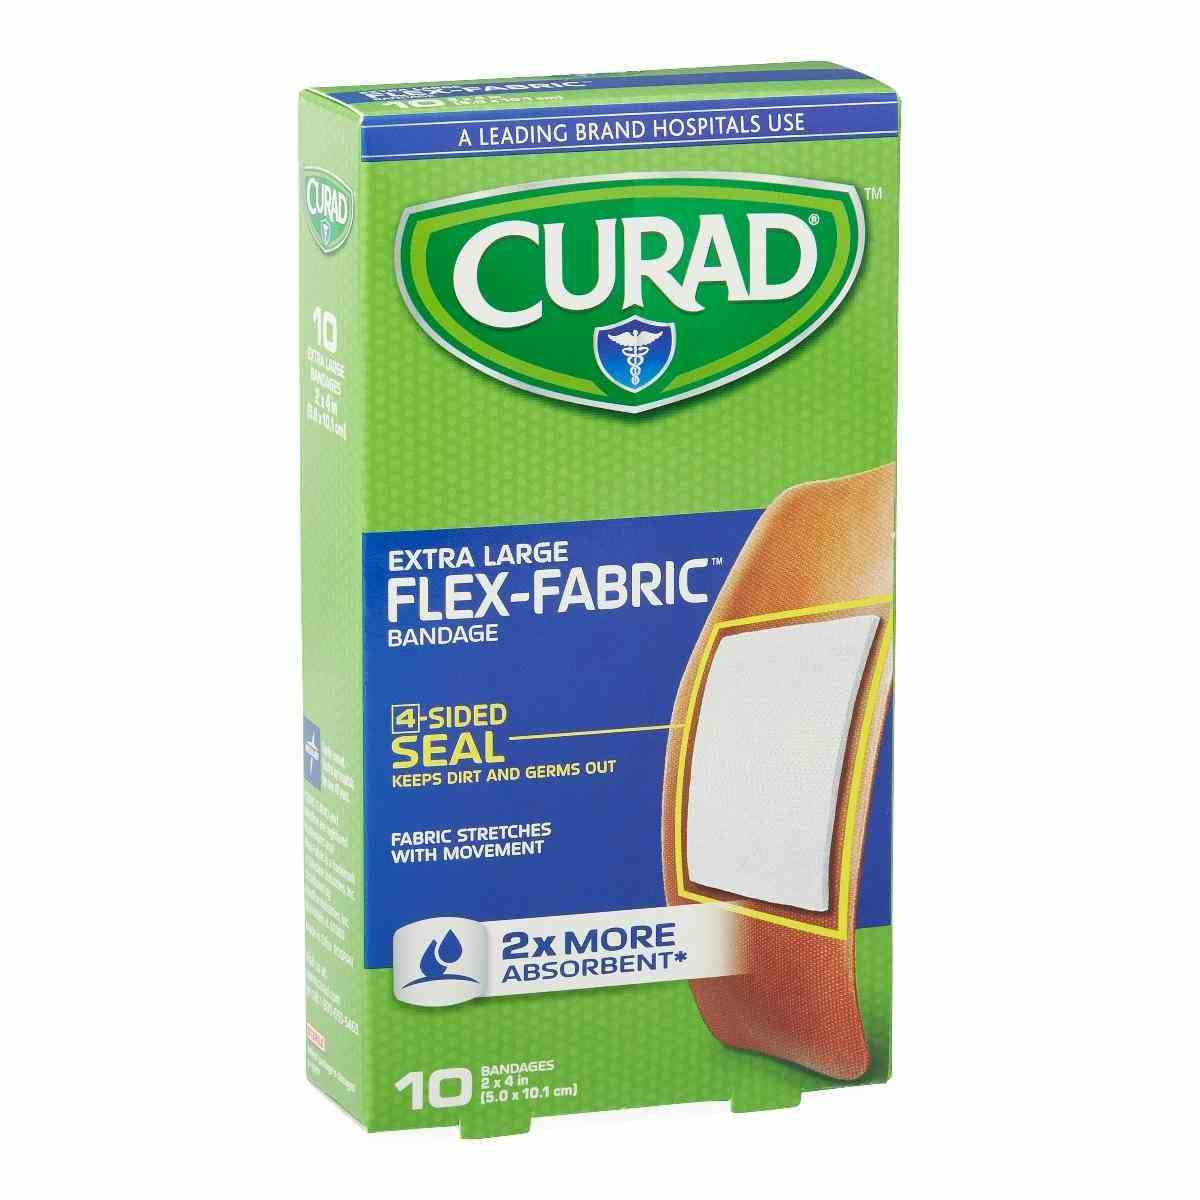 Curad Extra Large Flex-Fabric Bandages, 2" X 4", CUR00727RB, 2" X 4" - Case of 24